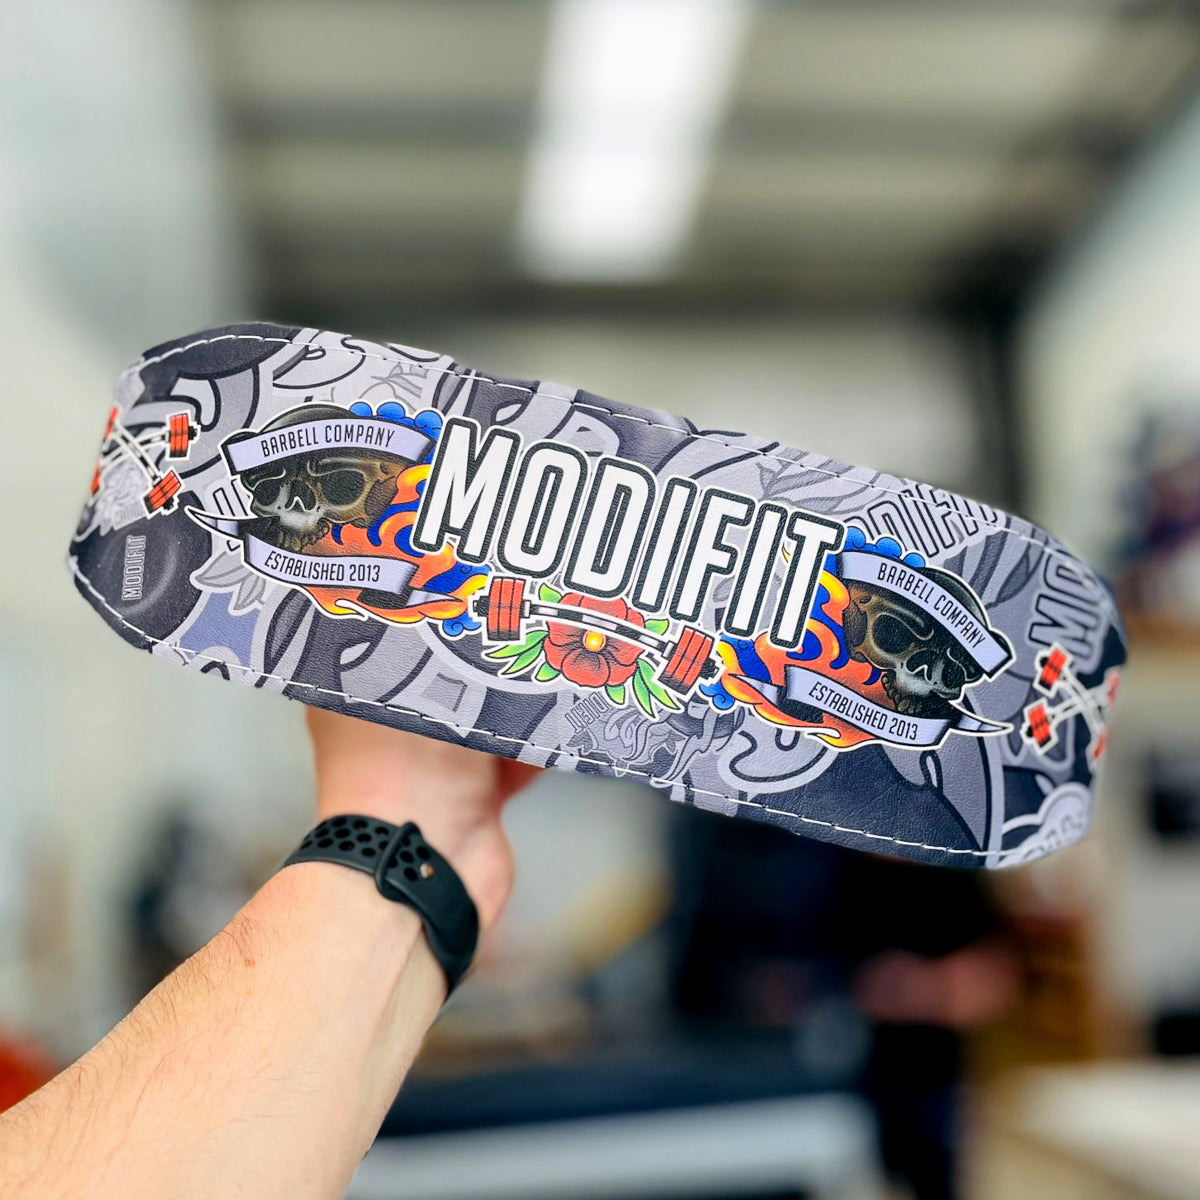 ModiFit Weightlifting Belt Elite Tattoo Edition - Hand Made in UK - Small Only